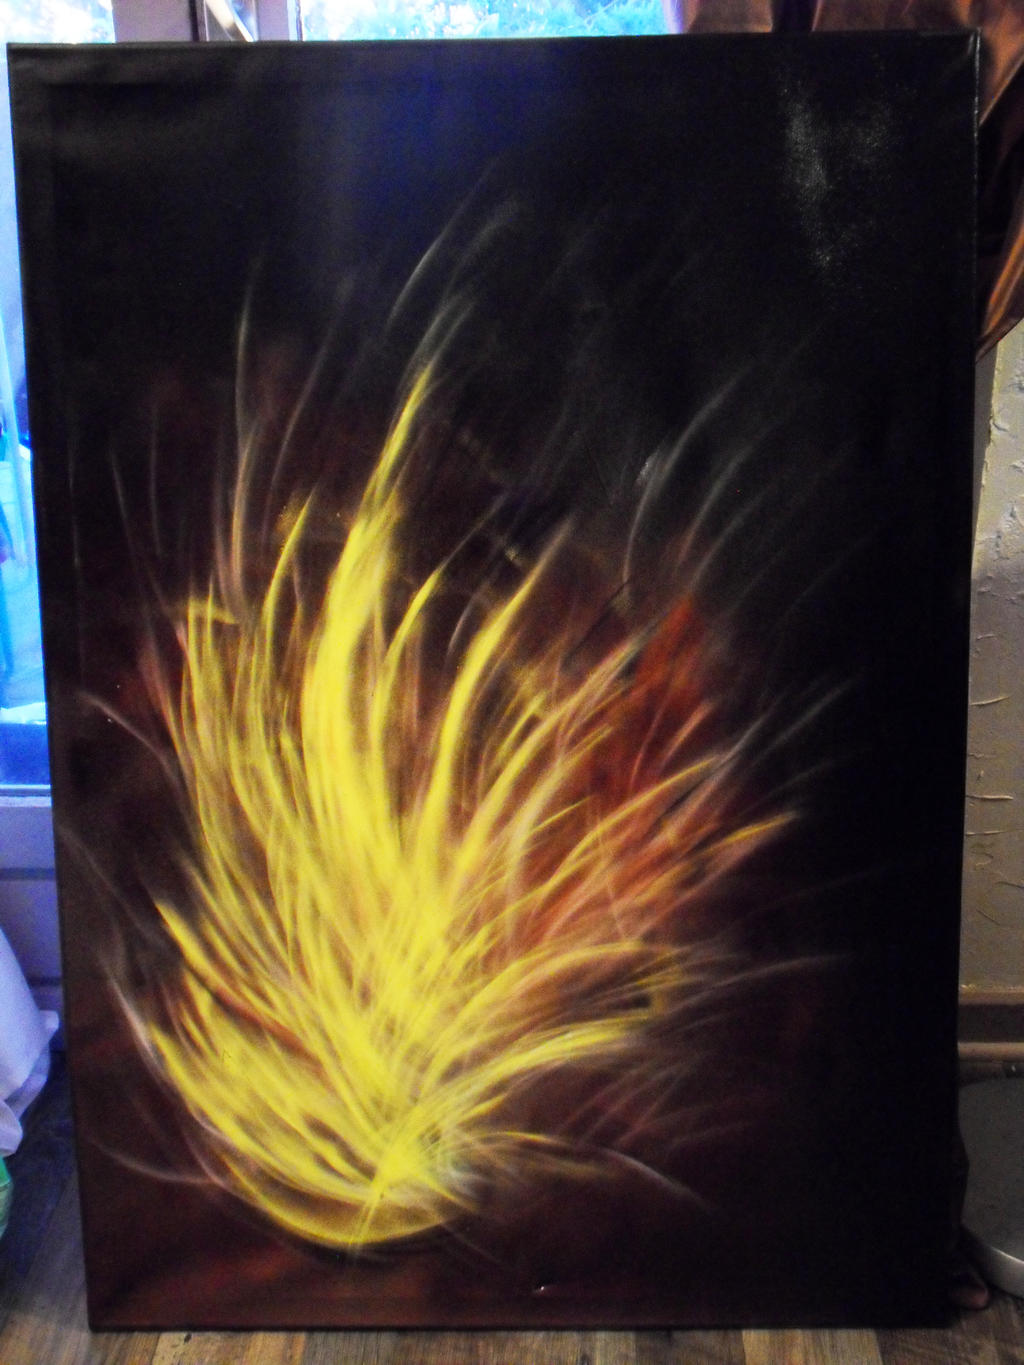 Spray paint flames on canvas XL size by Airgone on DeviantArt